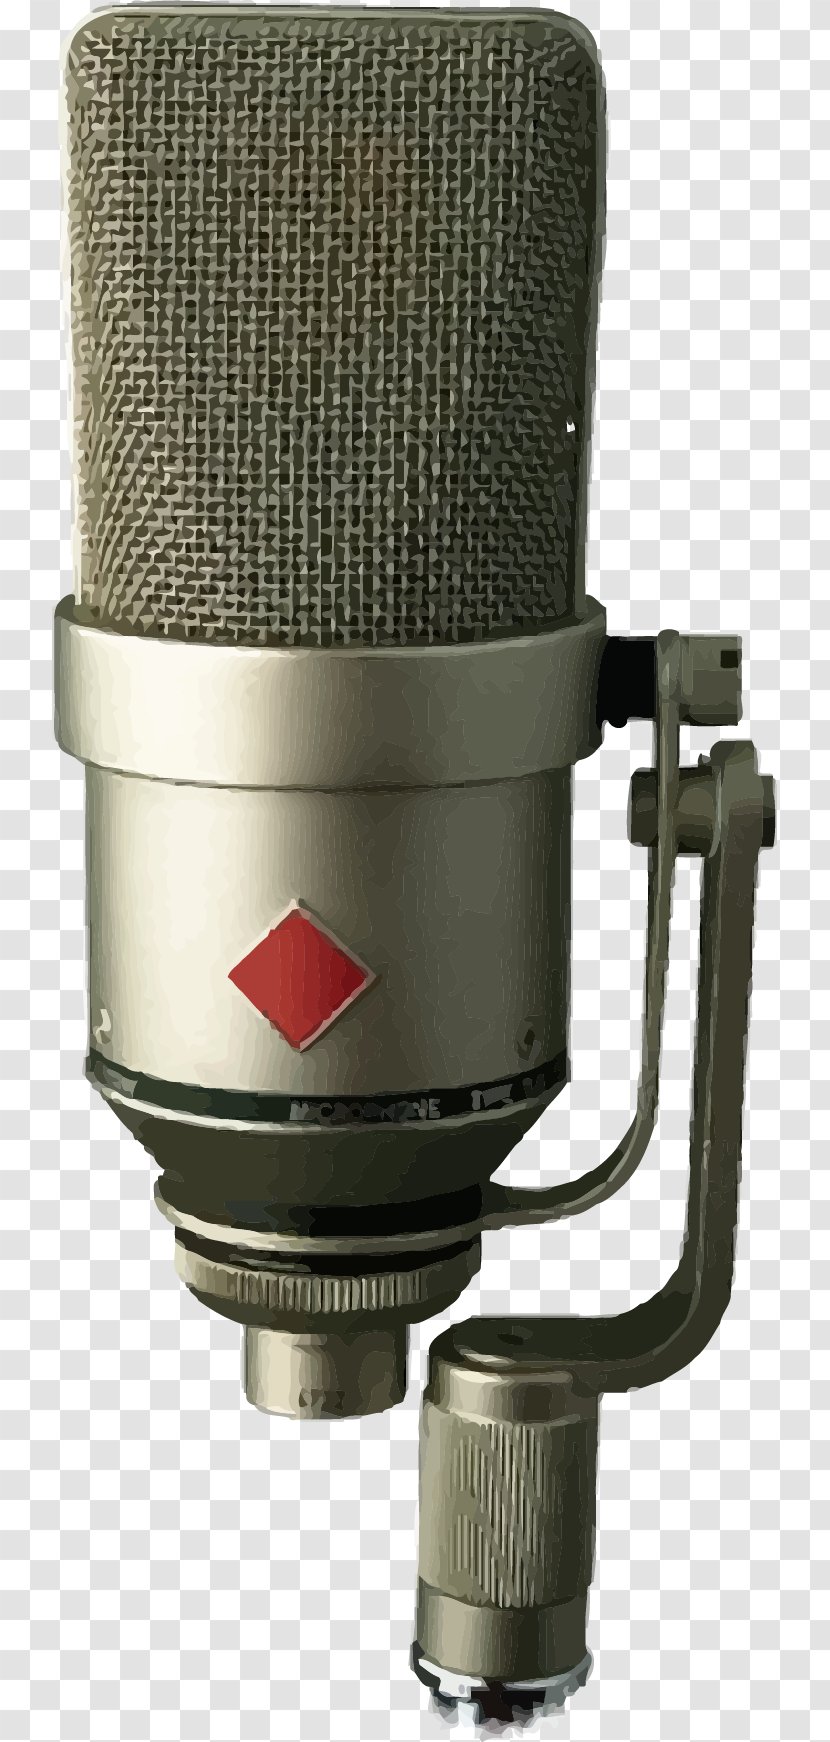 Microphone Download - Wheat Transparent PNG